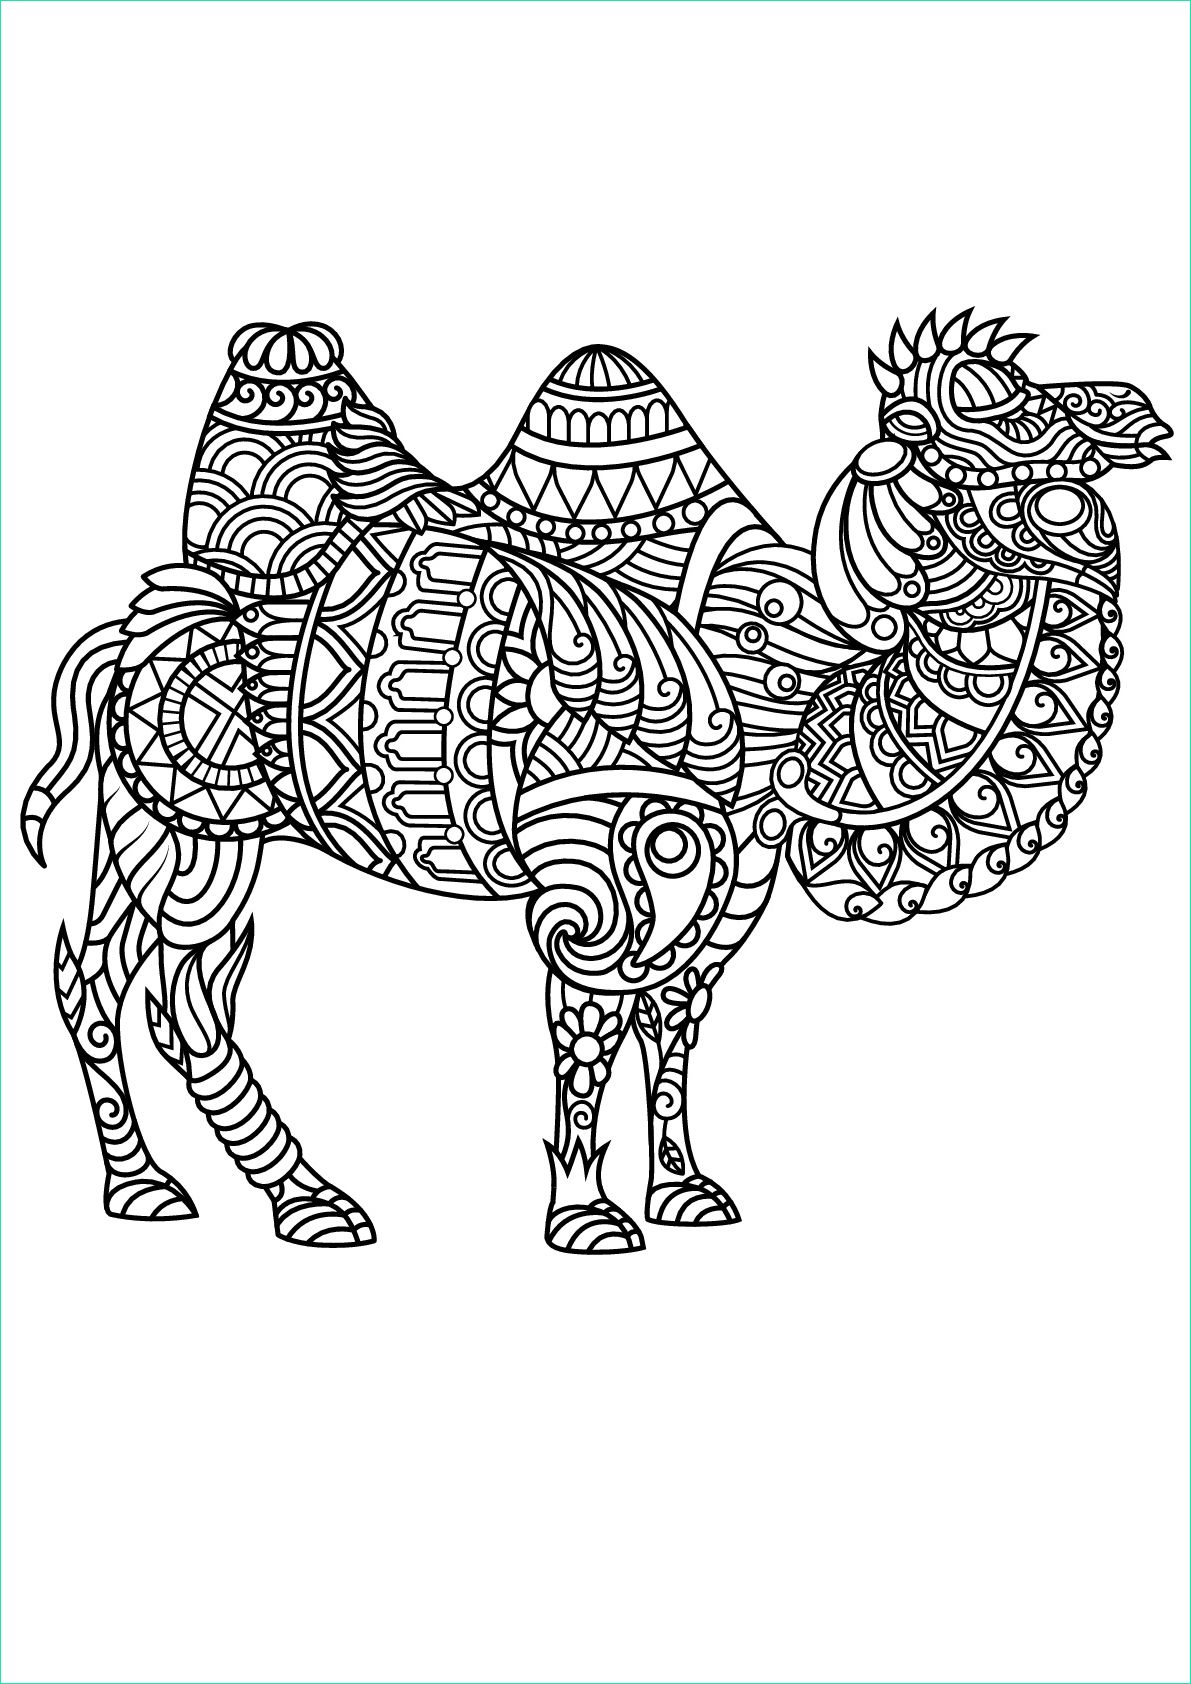 image=camels coloring free book camel 1